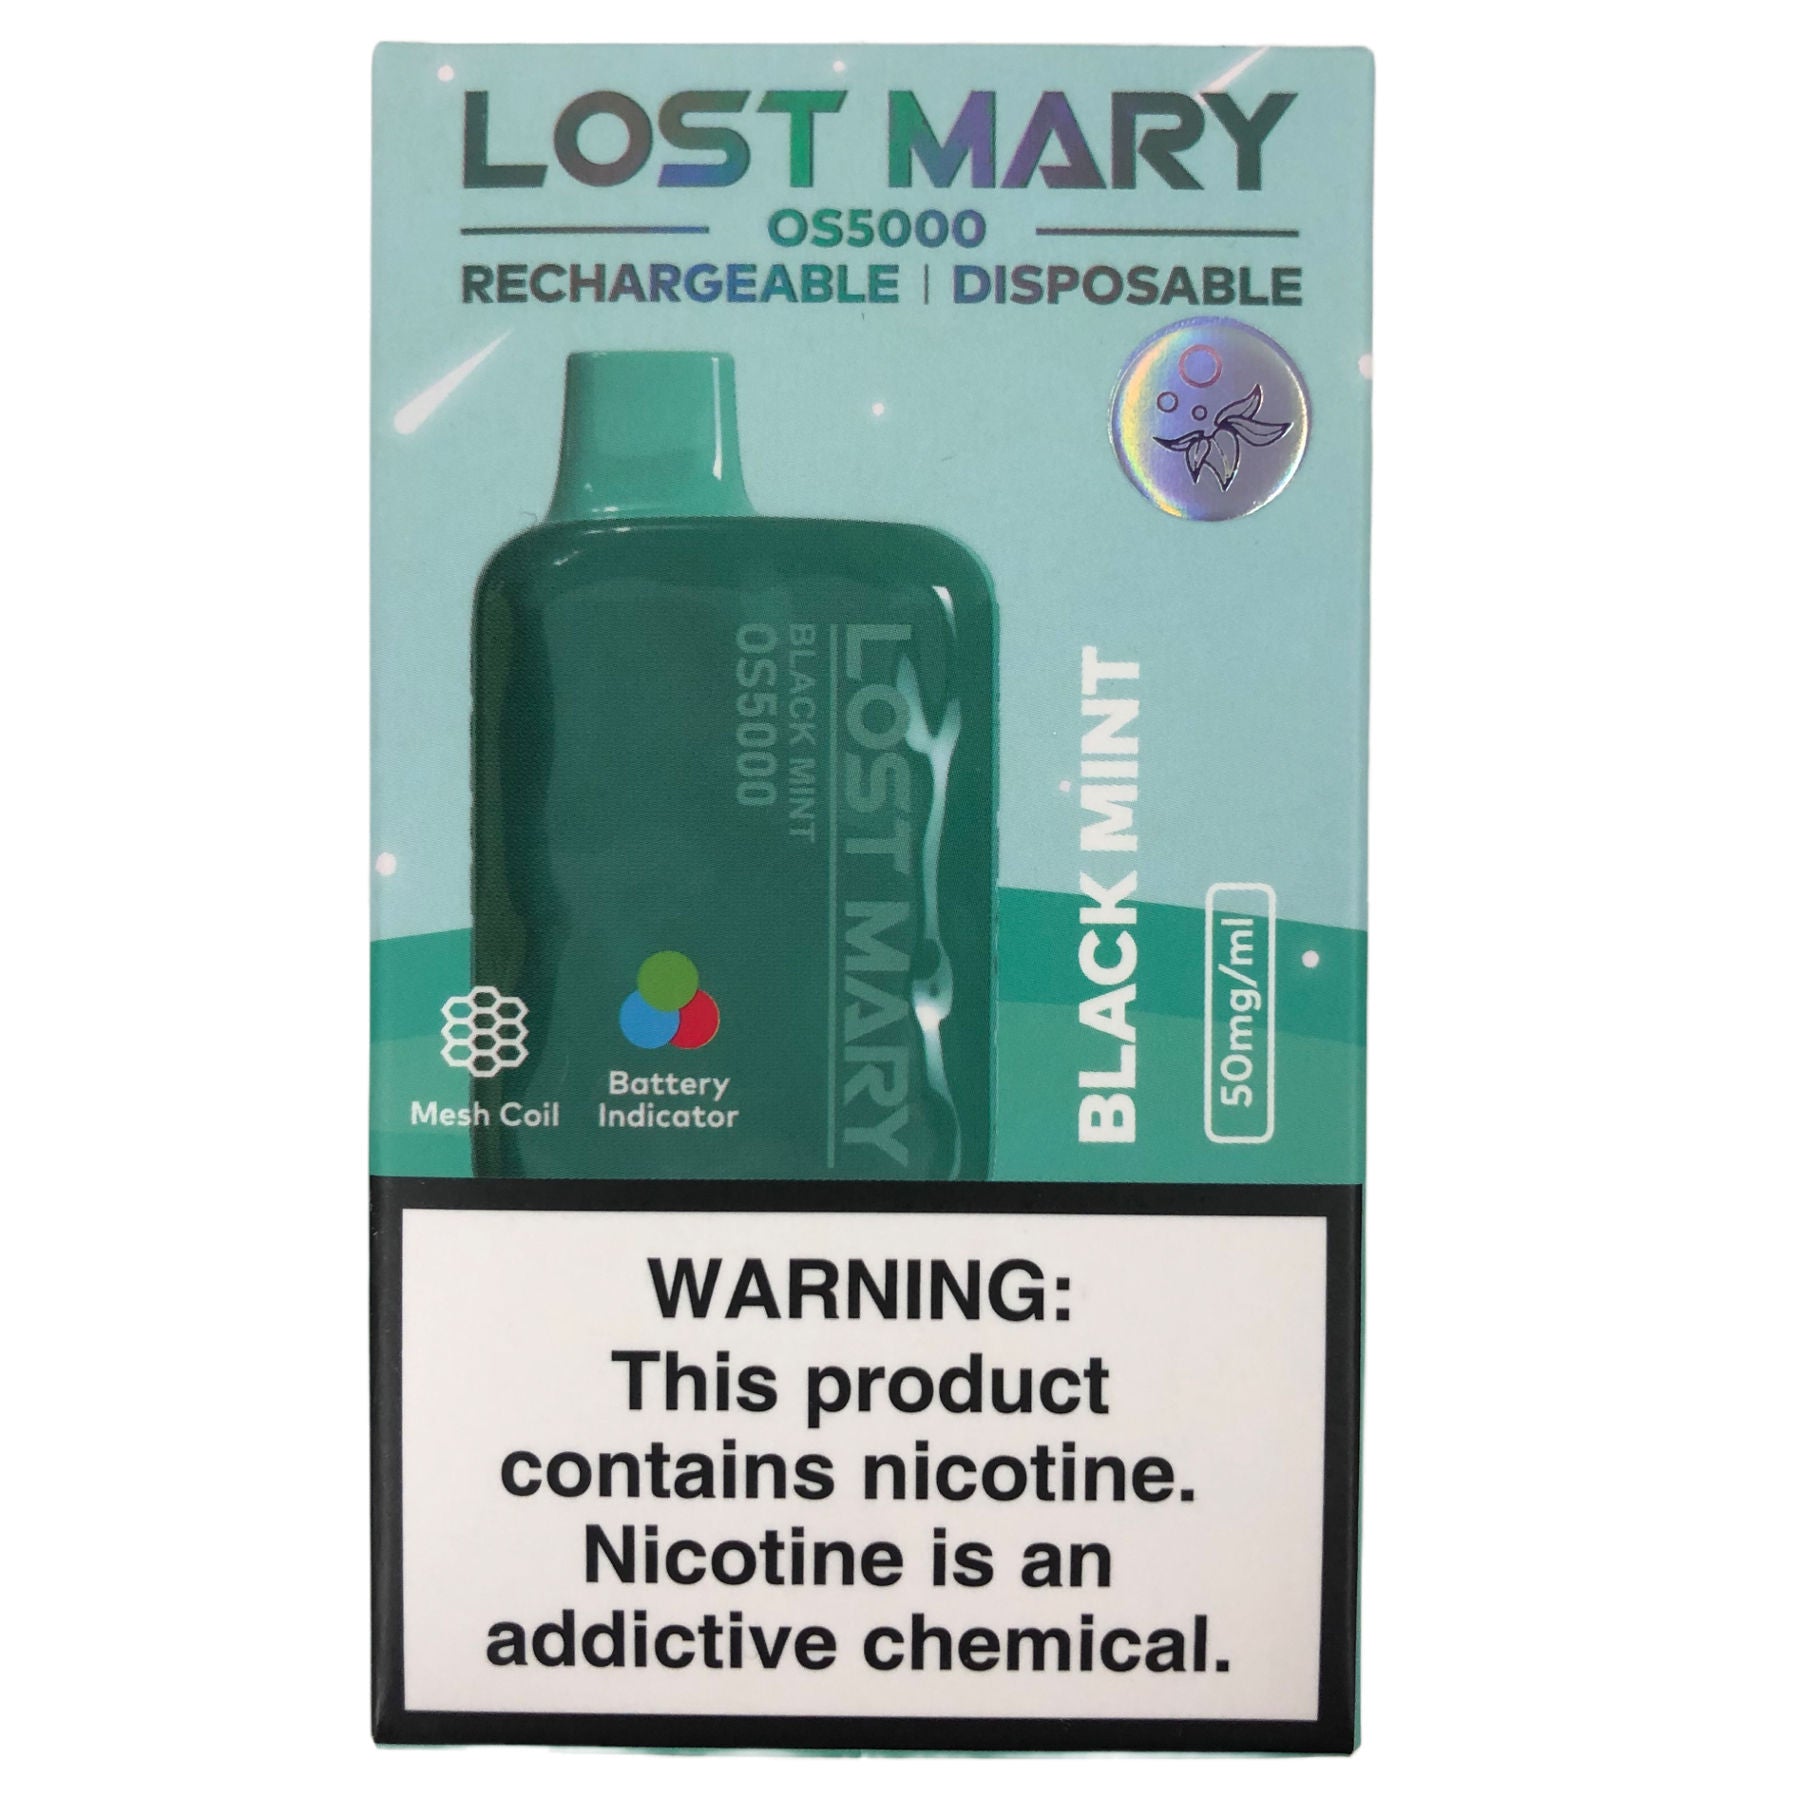 Lost Mary OS5000 Black Mint Nicotine Disposable